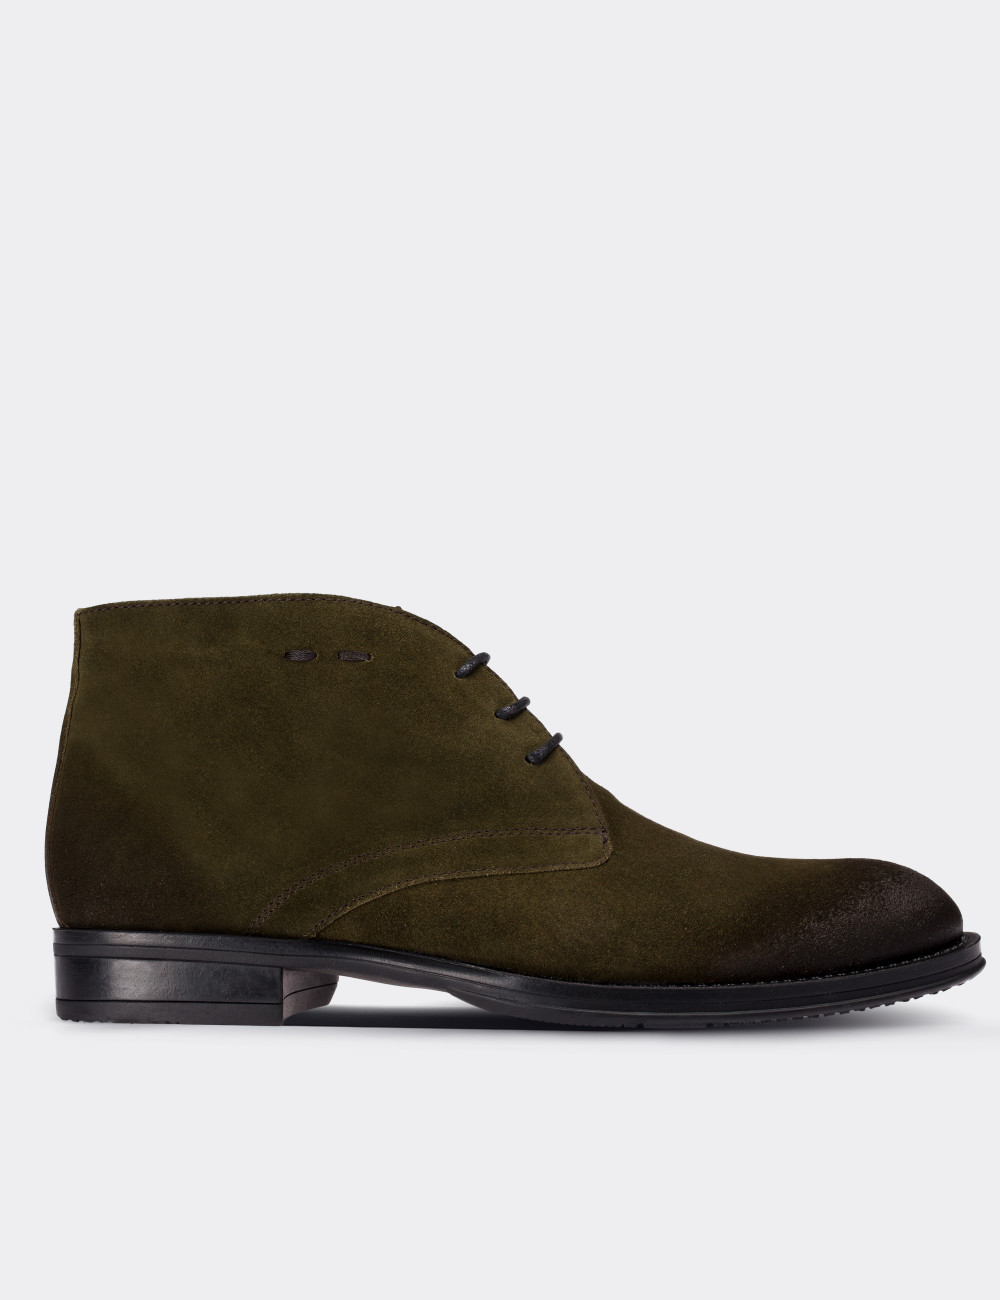 green suede boots